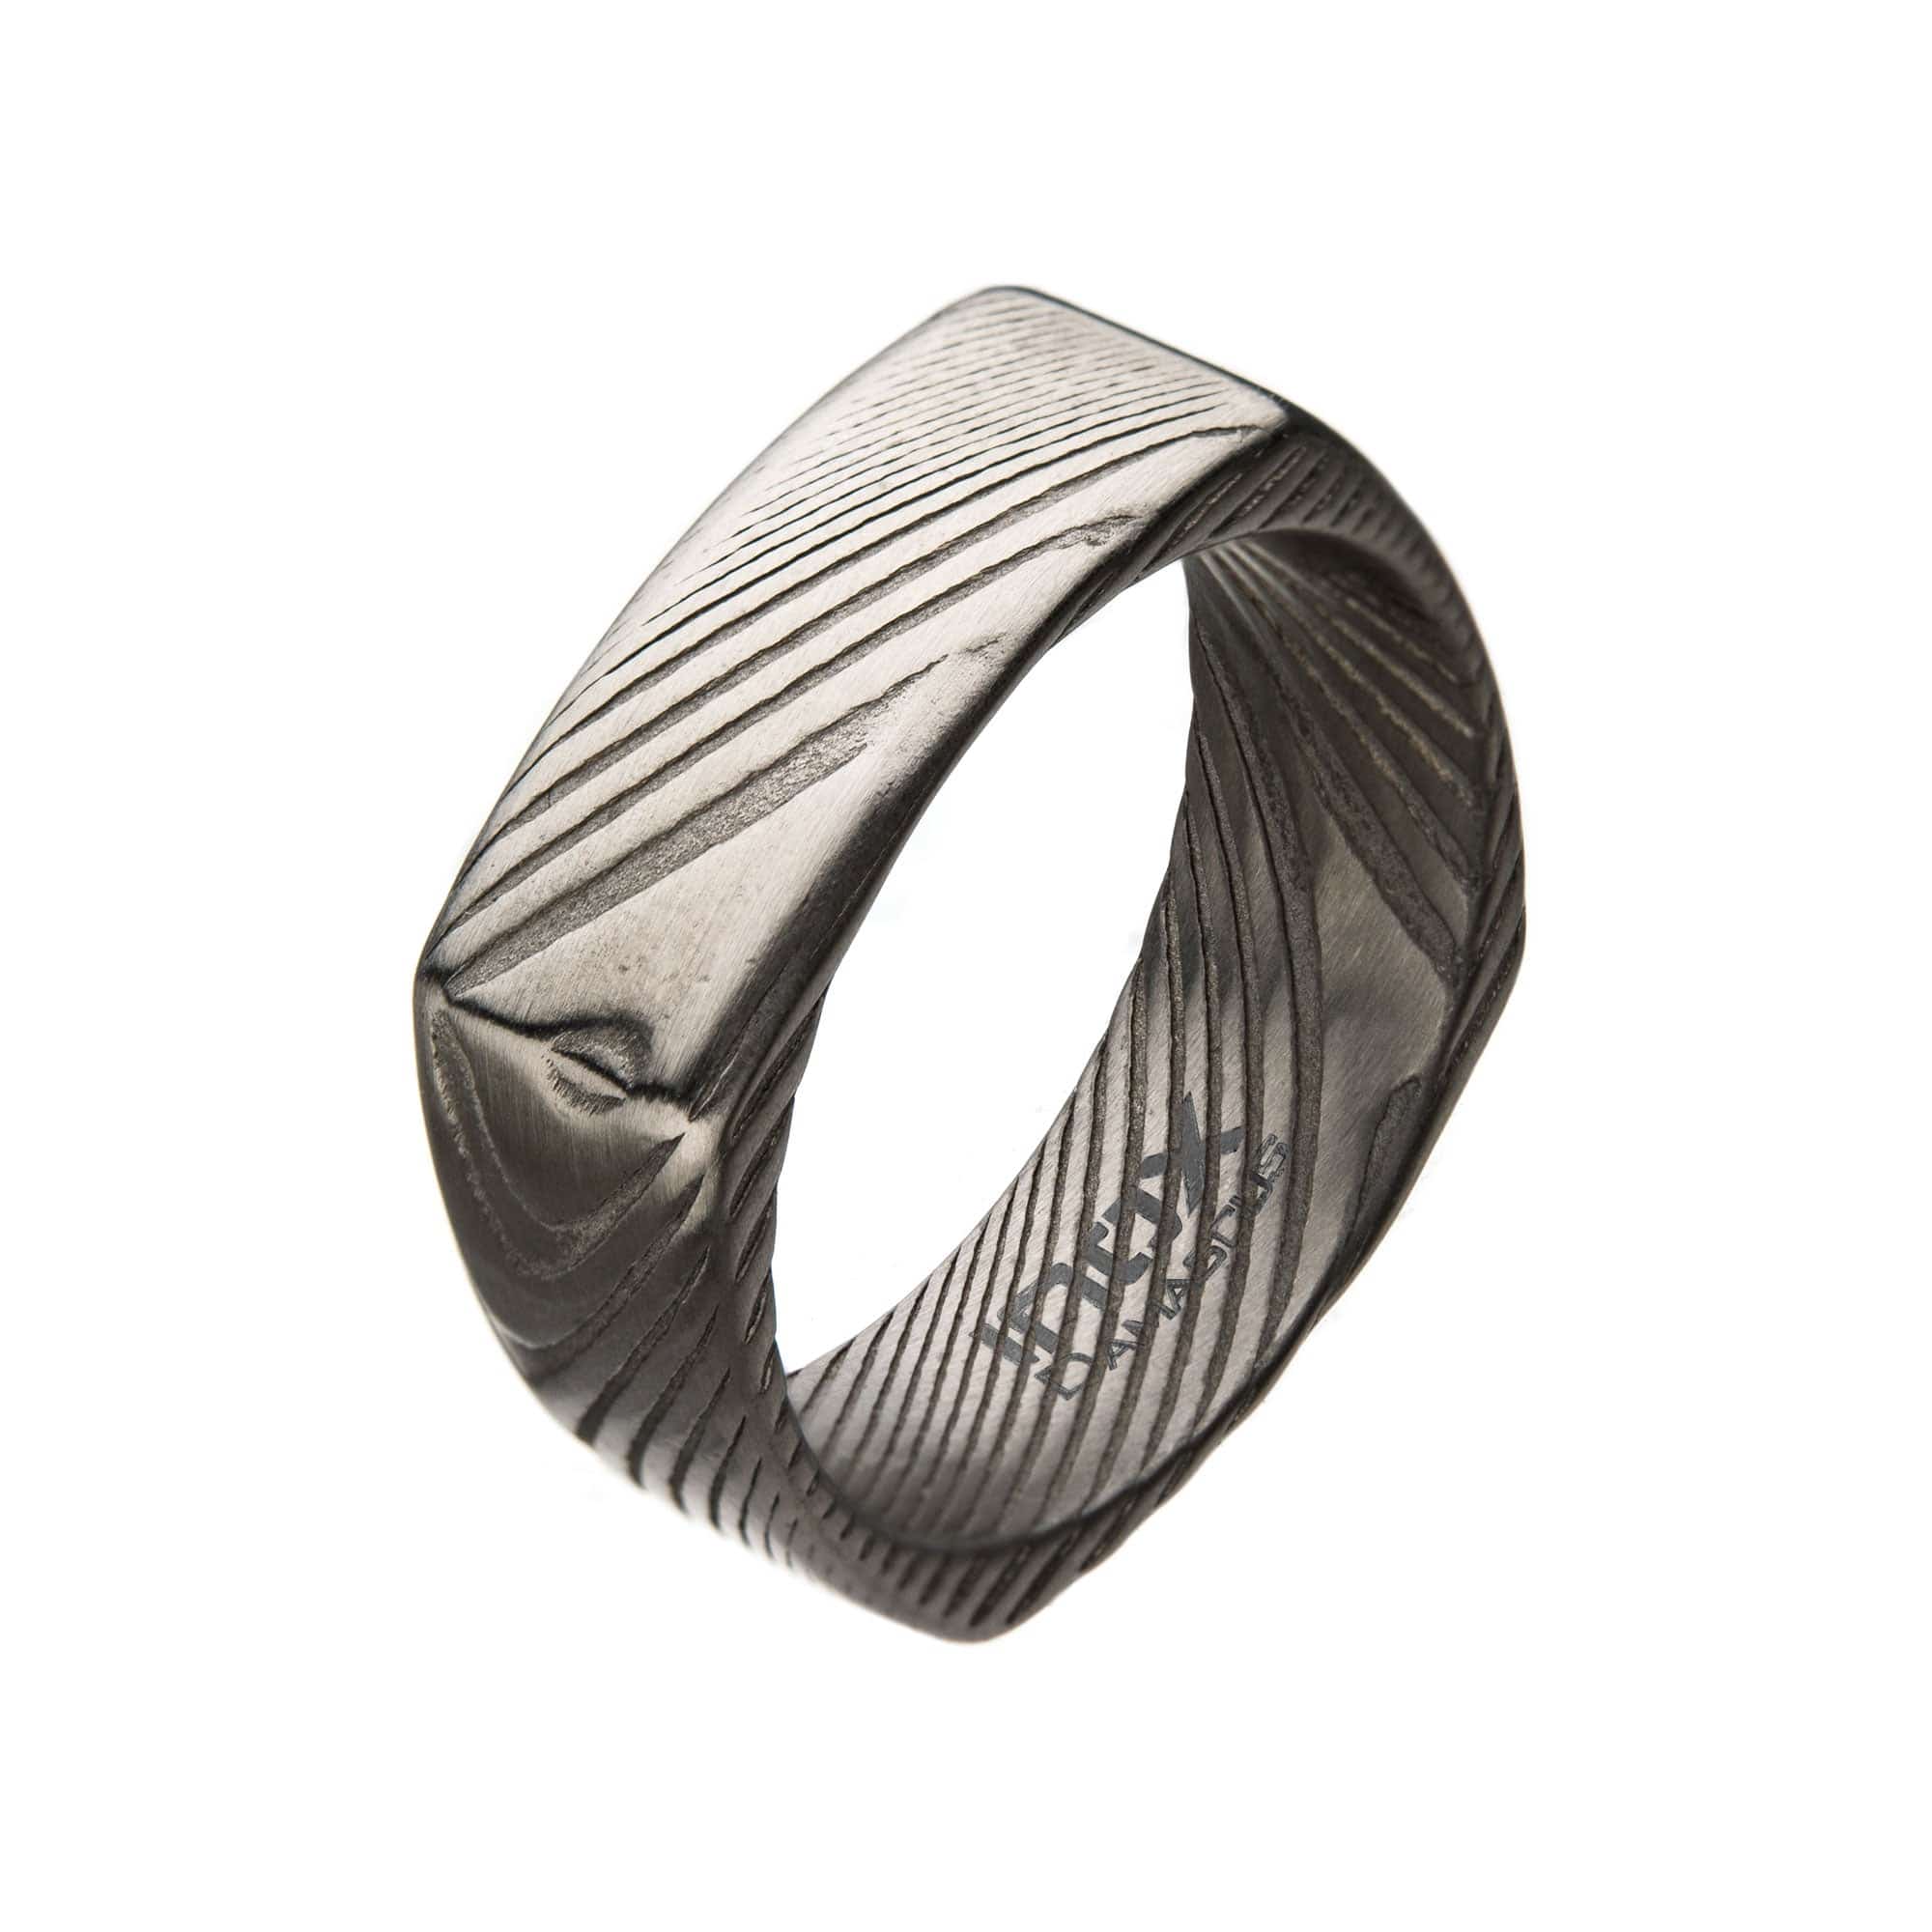 INOX JEWELRY Rings Damascus Steel Silver Tone 8mm Square Ring